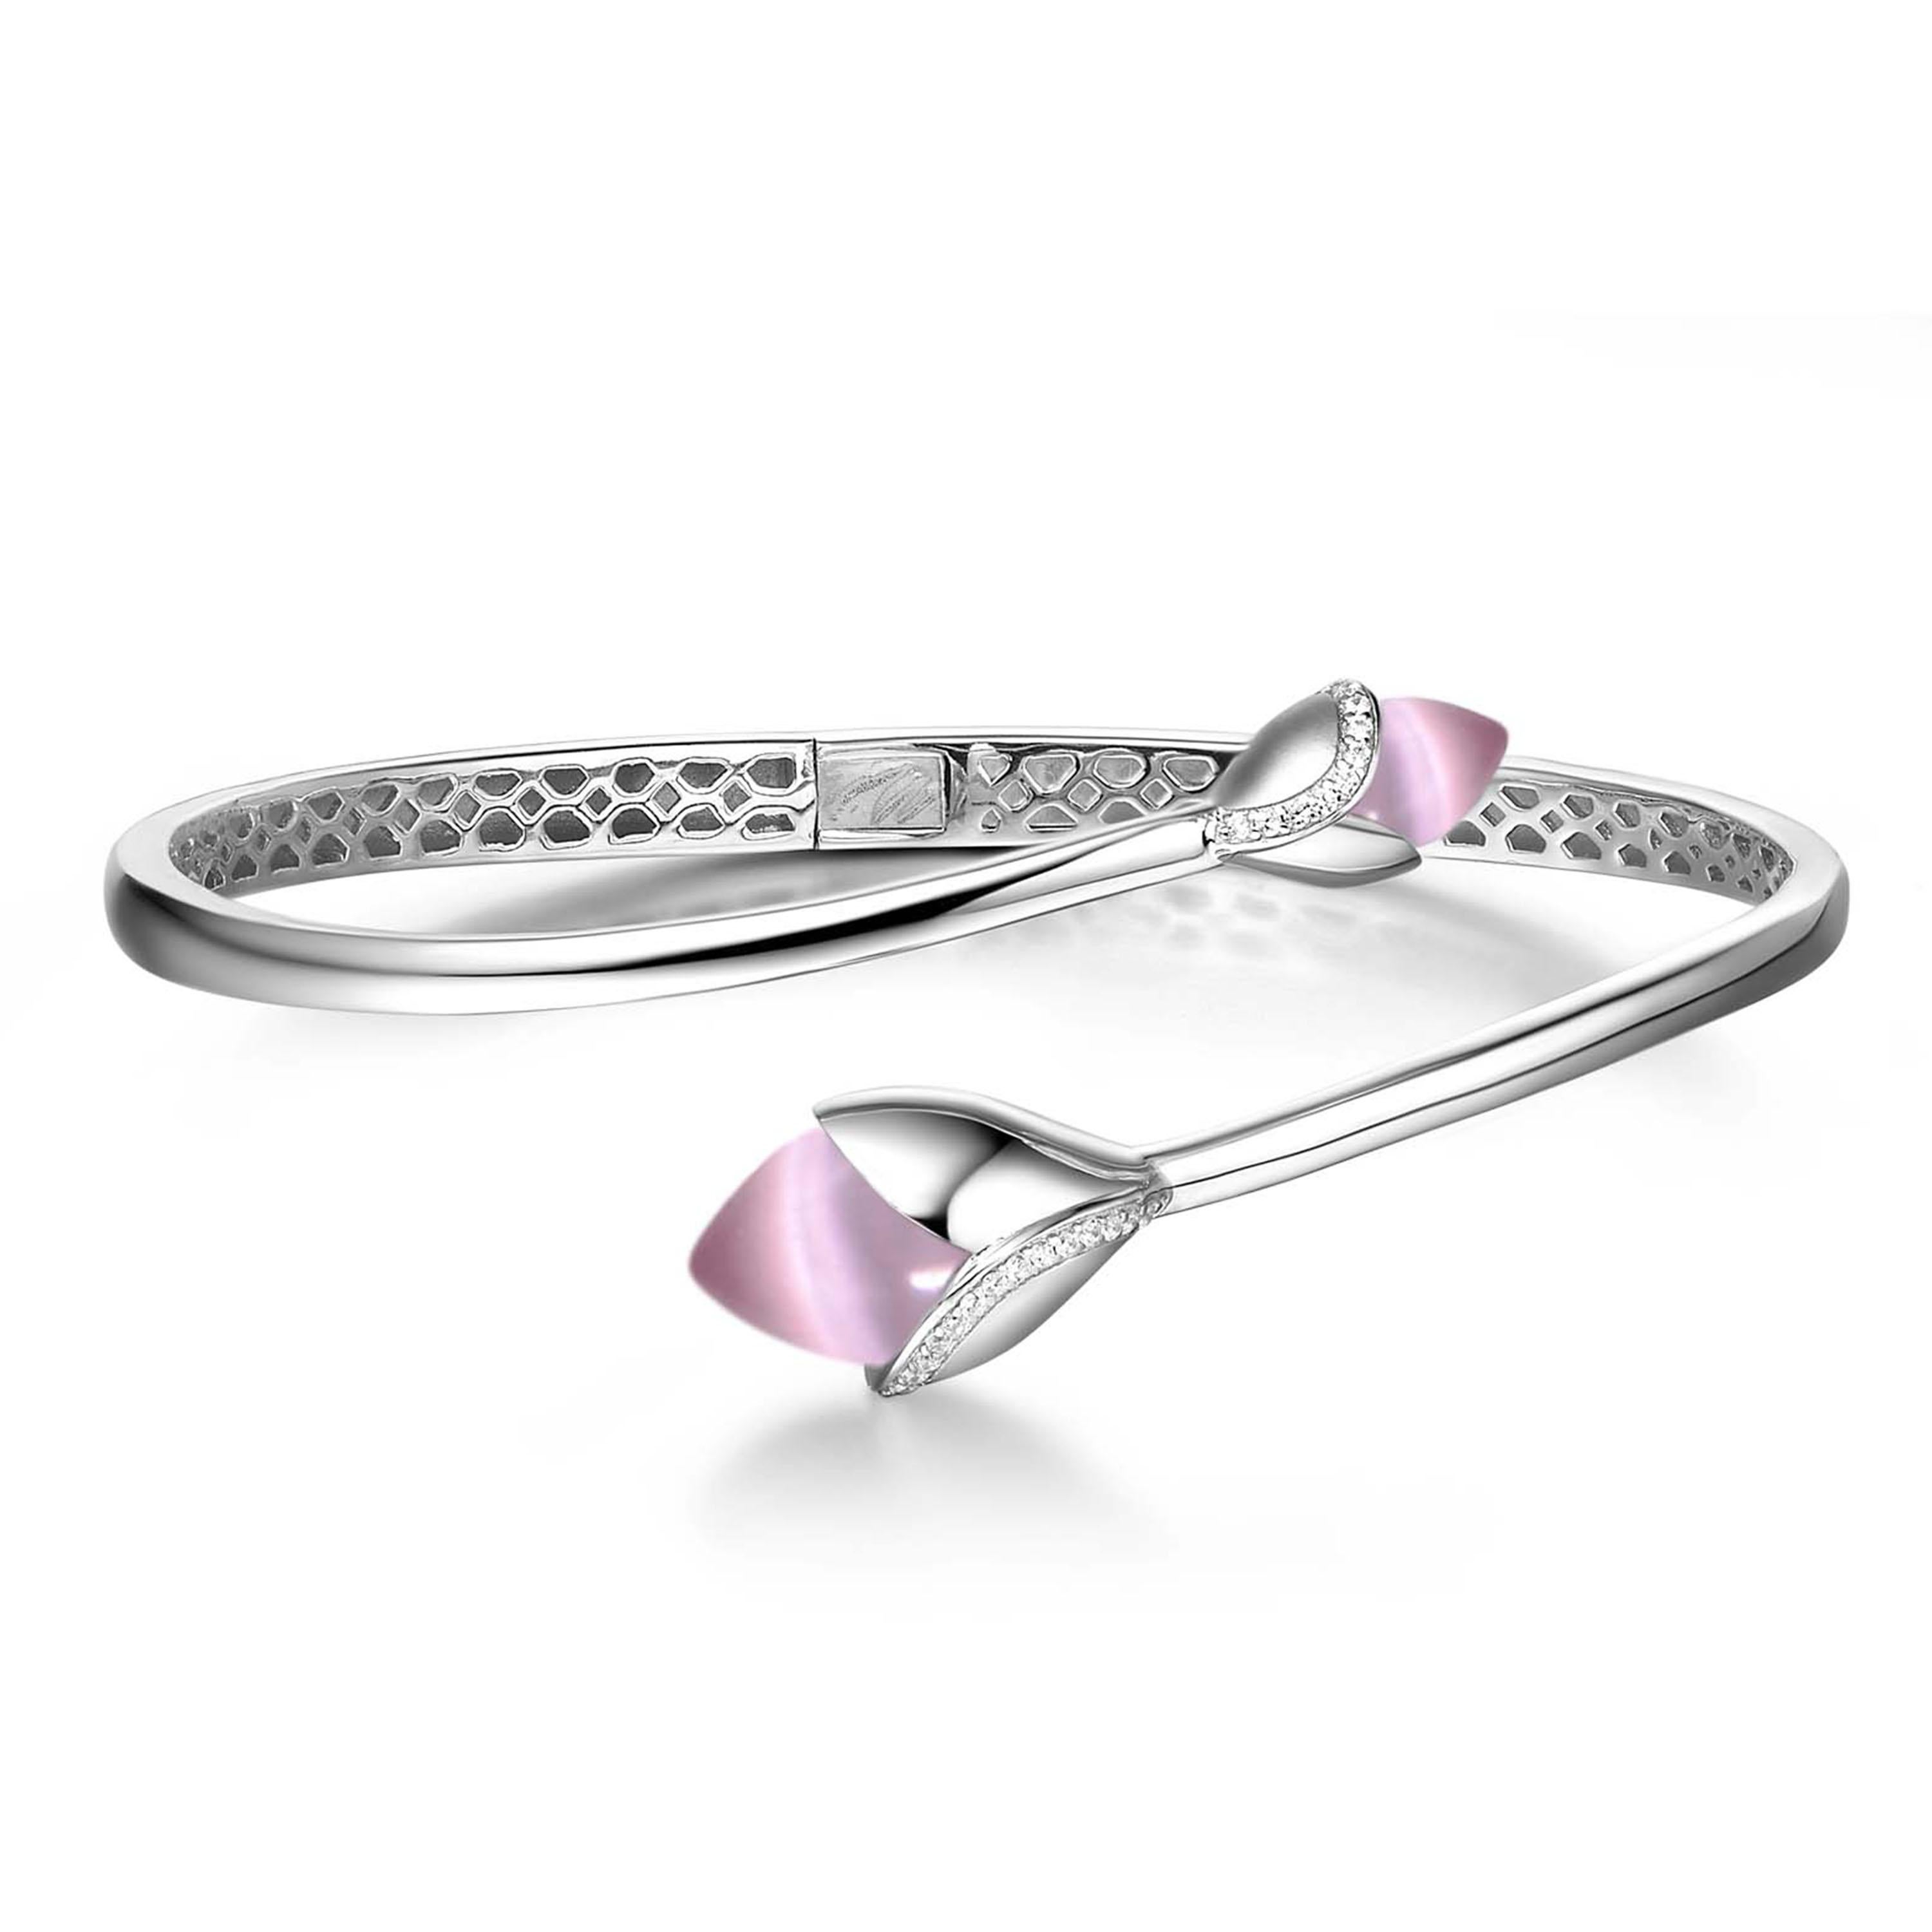 Description:
Magnolia bangle pink cat’s eye stone and cubic zirconia, set in satin and mirror polish white rhodium plate on sterling silver.

Inspiration:
This capsule collection blossoms with the pretty cat’s eyes and dew drops of 8 hearts and 8